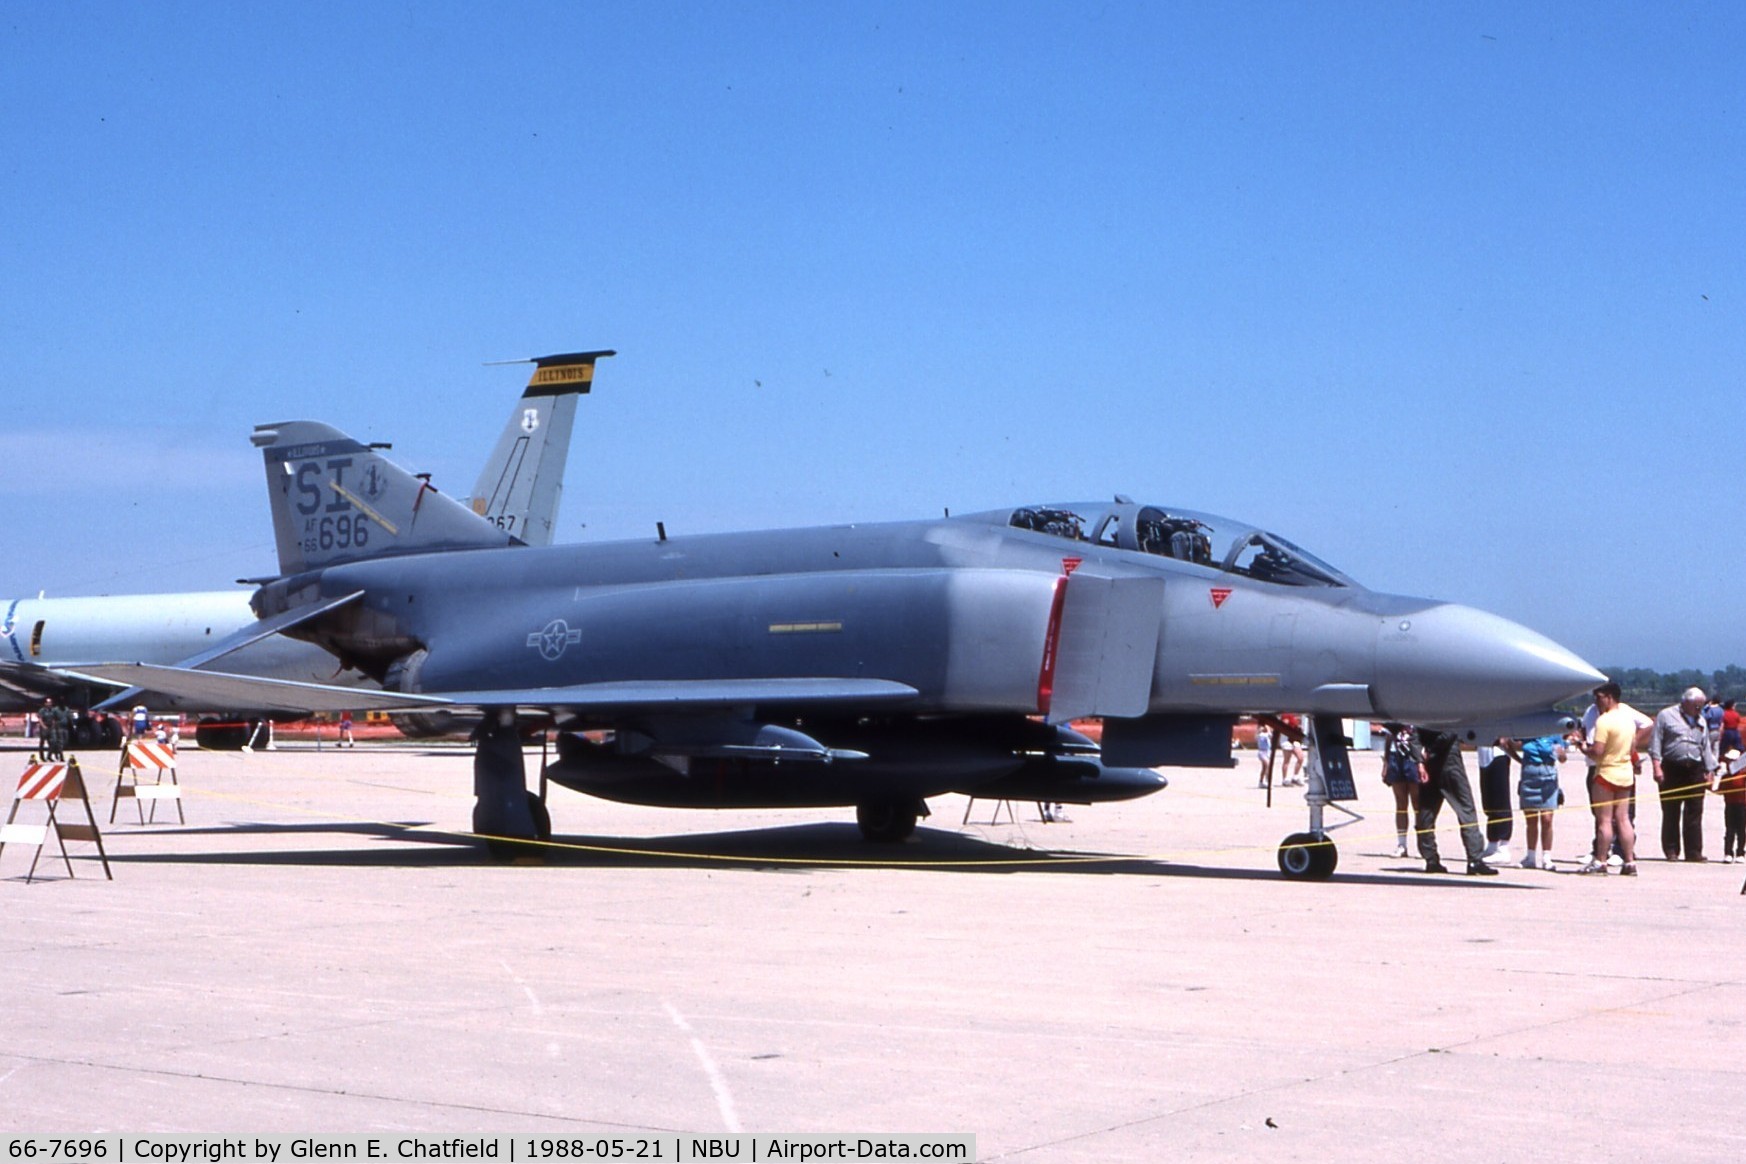 66-7696, 1966 McDonnell F-4D Phantom II C/N 2303, F-4D at the open house